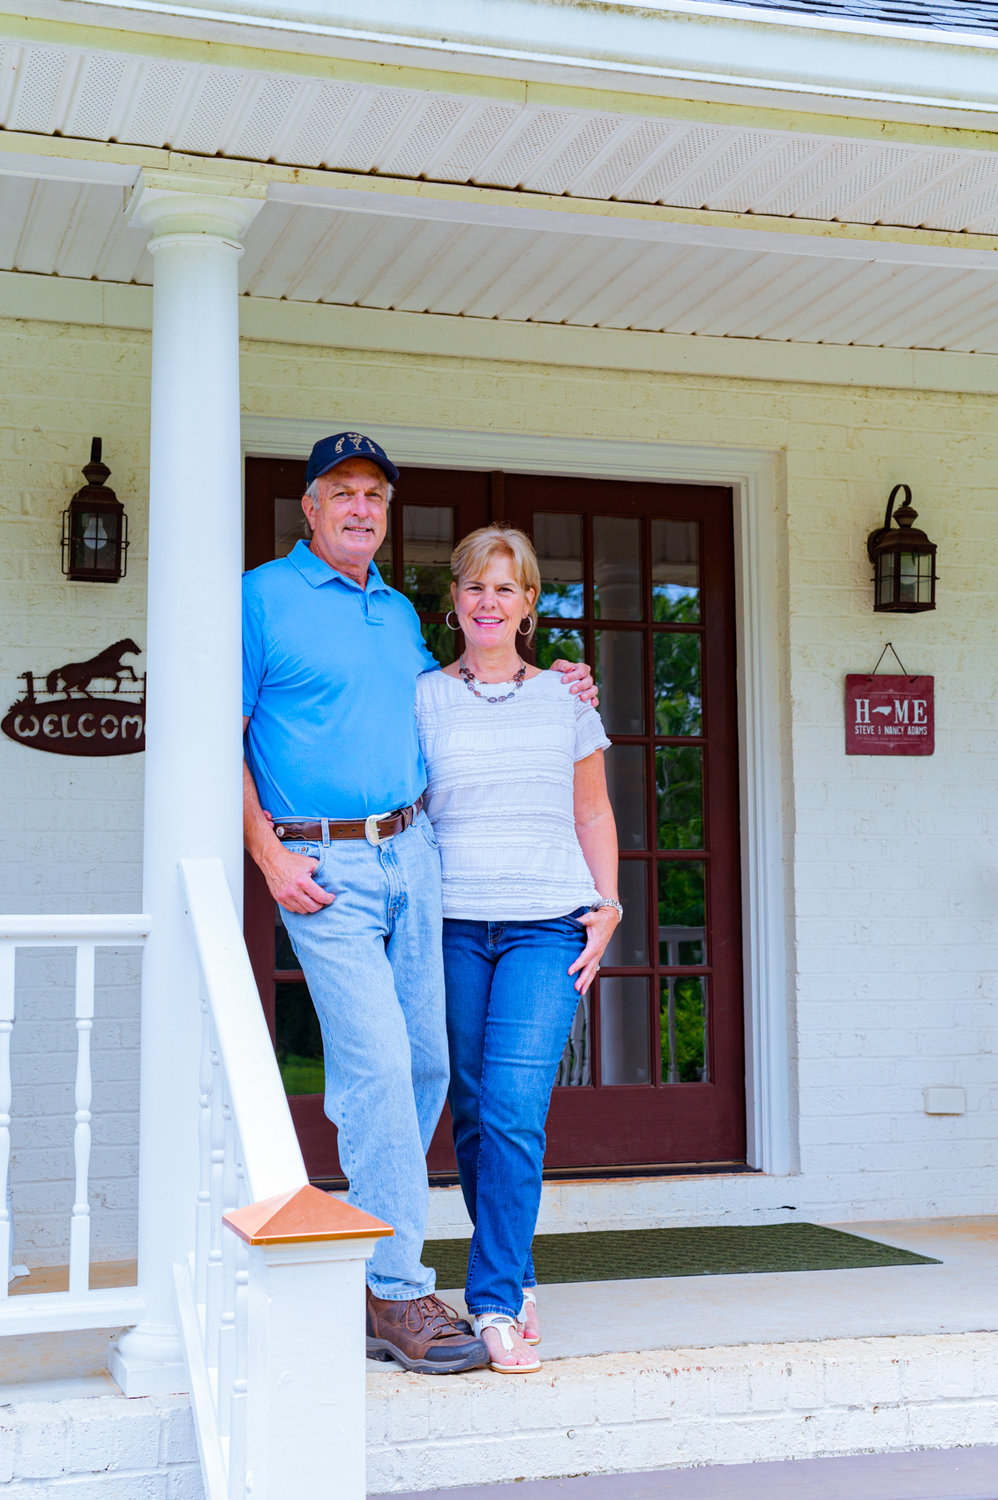 Steve and Nancy Adams stand on their porch at Lucky Bar Farm, a bed and breakfast located in Moncure. Lucky Bar Farm opened in October 2019, making it one of the newer B&Bs in Chatham County.